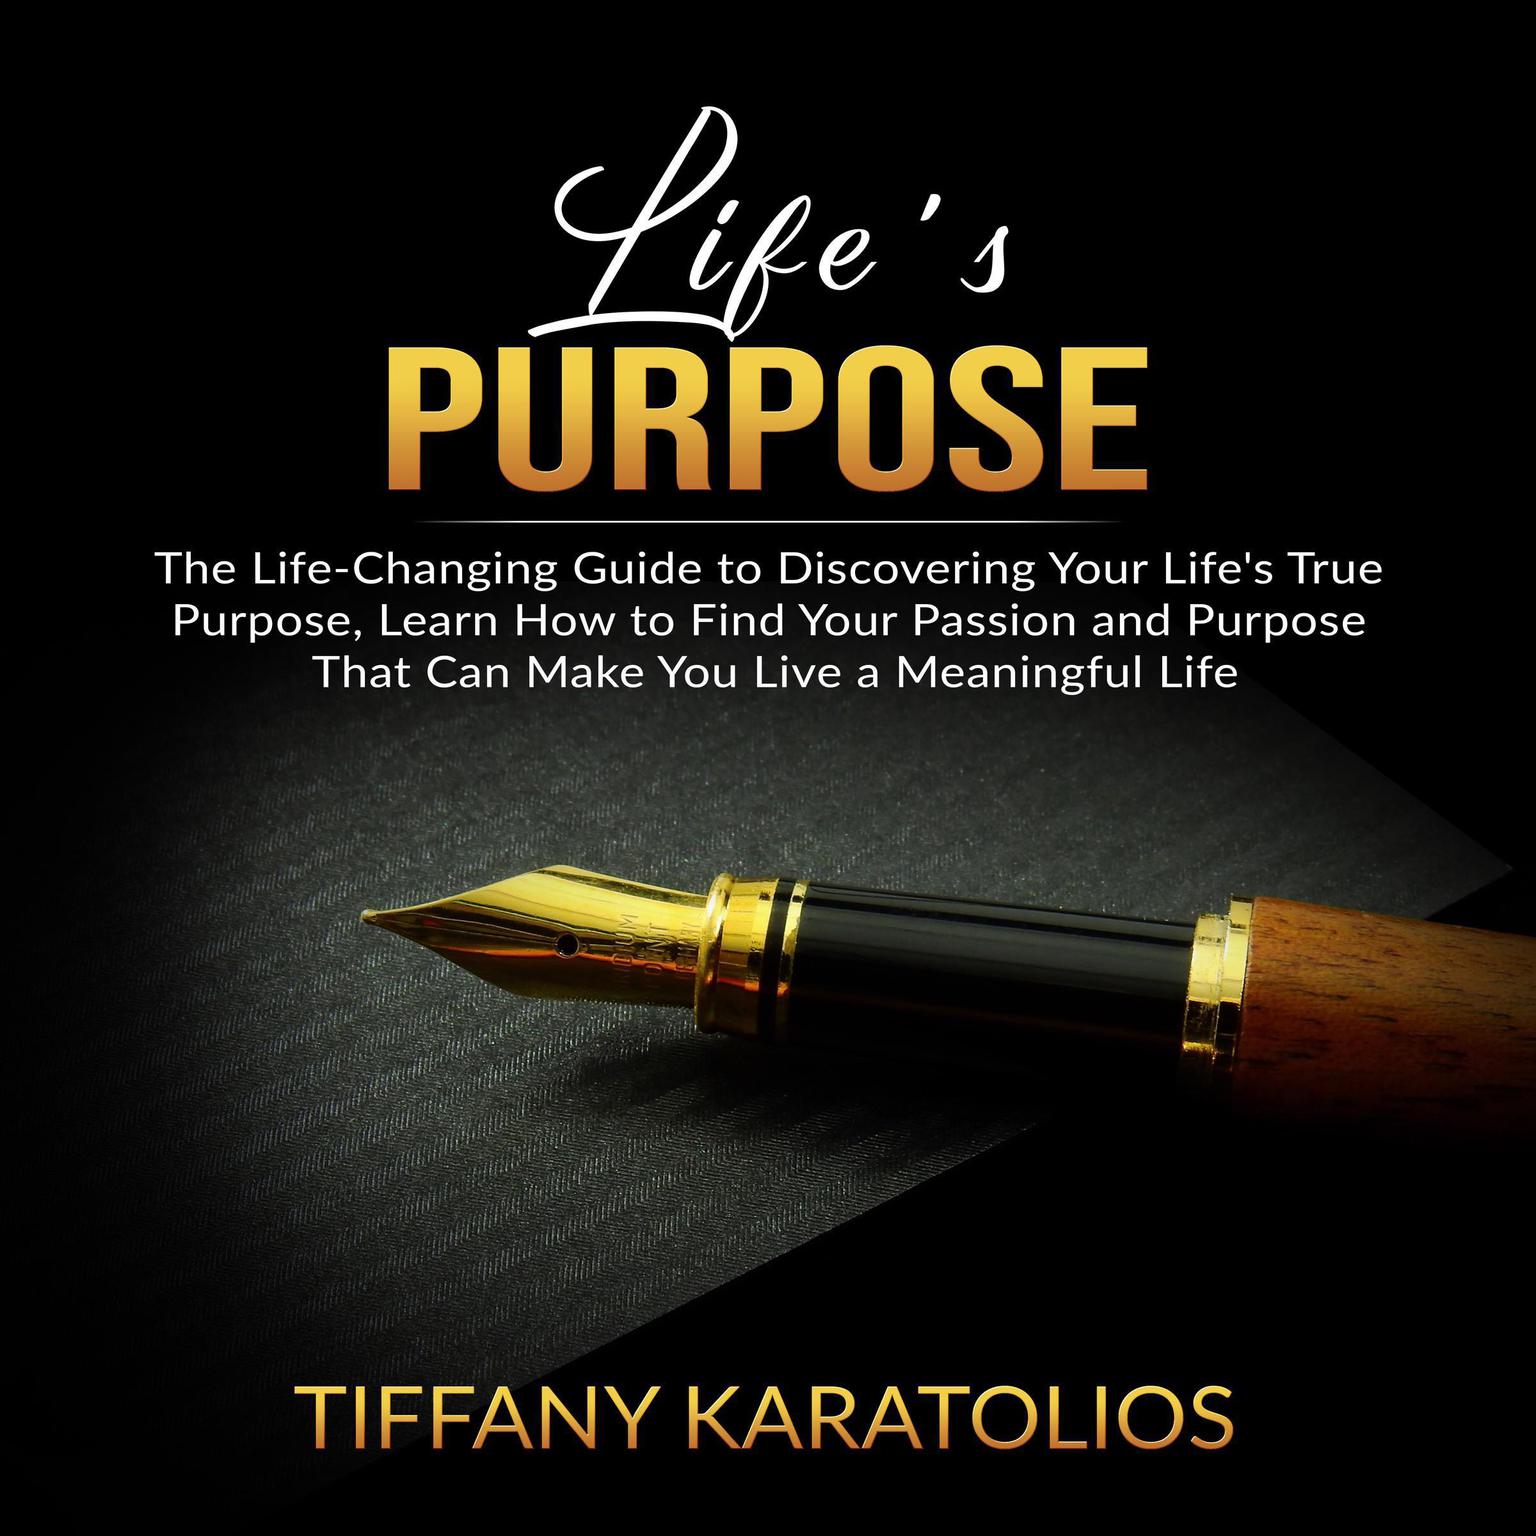 Lifes Purpose: The Life-Changing Guide to Discovering Your Lifes True Purpose, Learn How to Find Your Passion and Purpose That Can Make You Live a Meaningful Life Audiobook, by Tiffany Karatolios